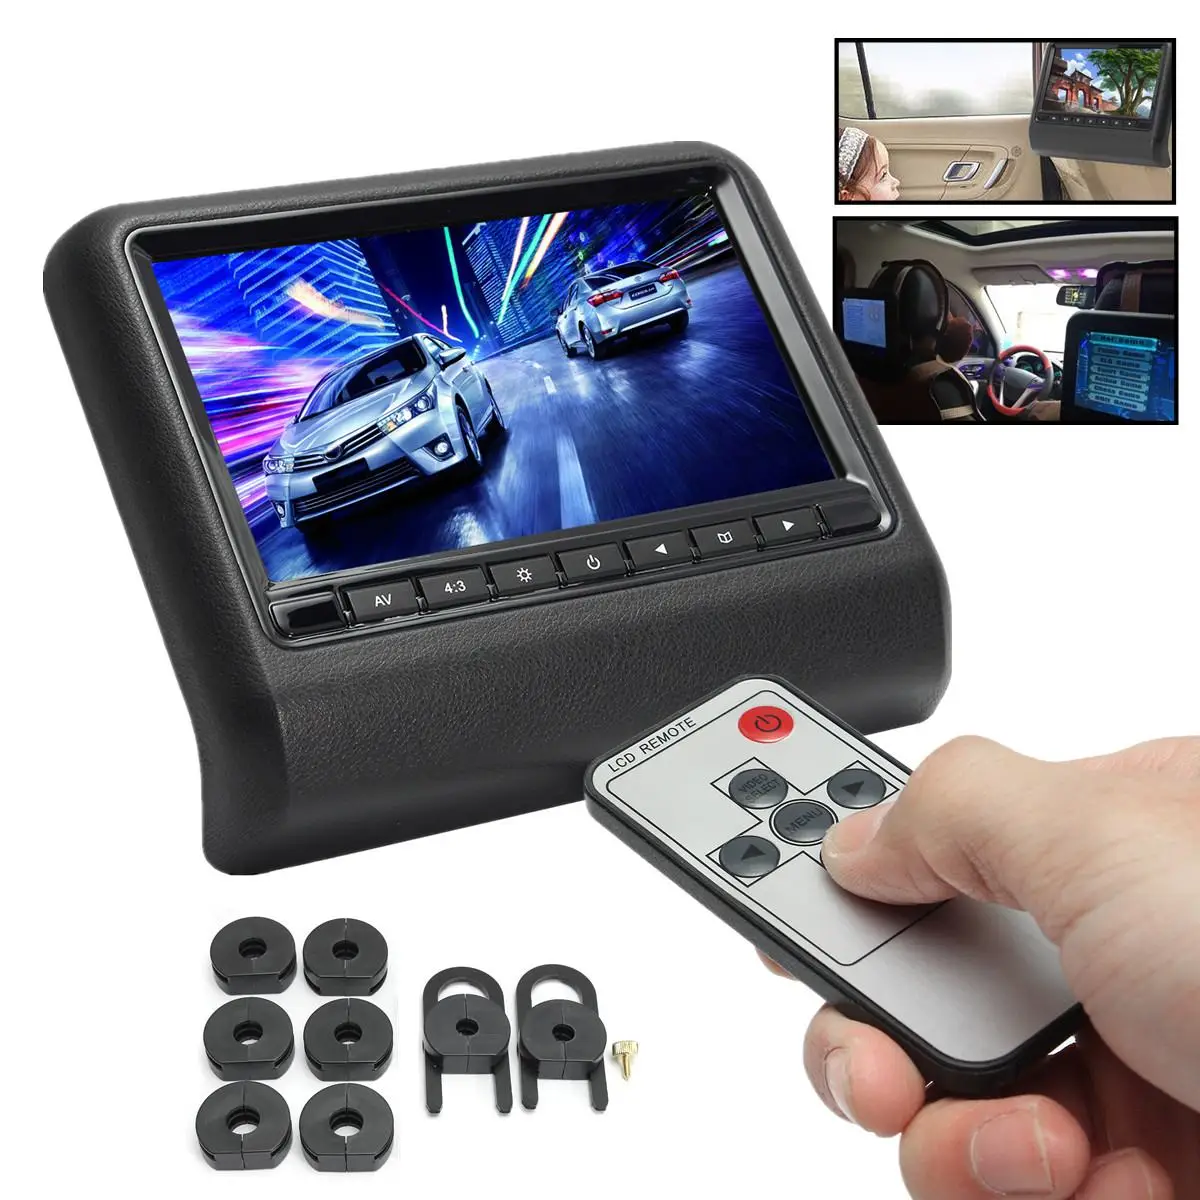 

9 Inch DC 12V 5W Car Headrest Backseat Monitor DVD Video Player Display LCD Screen Mount PAL/NTSC Image Format 2 Way Video Input